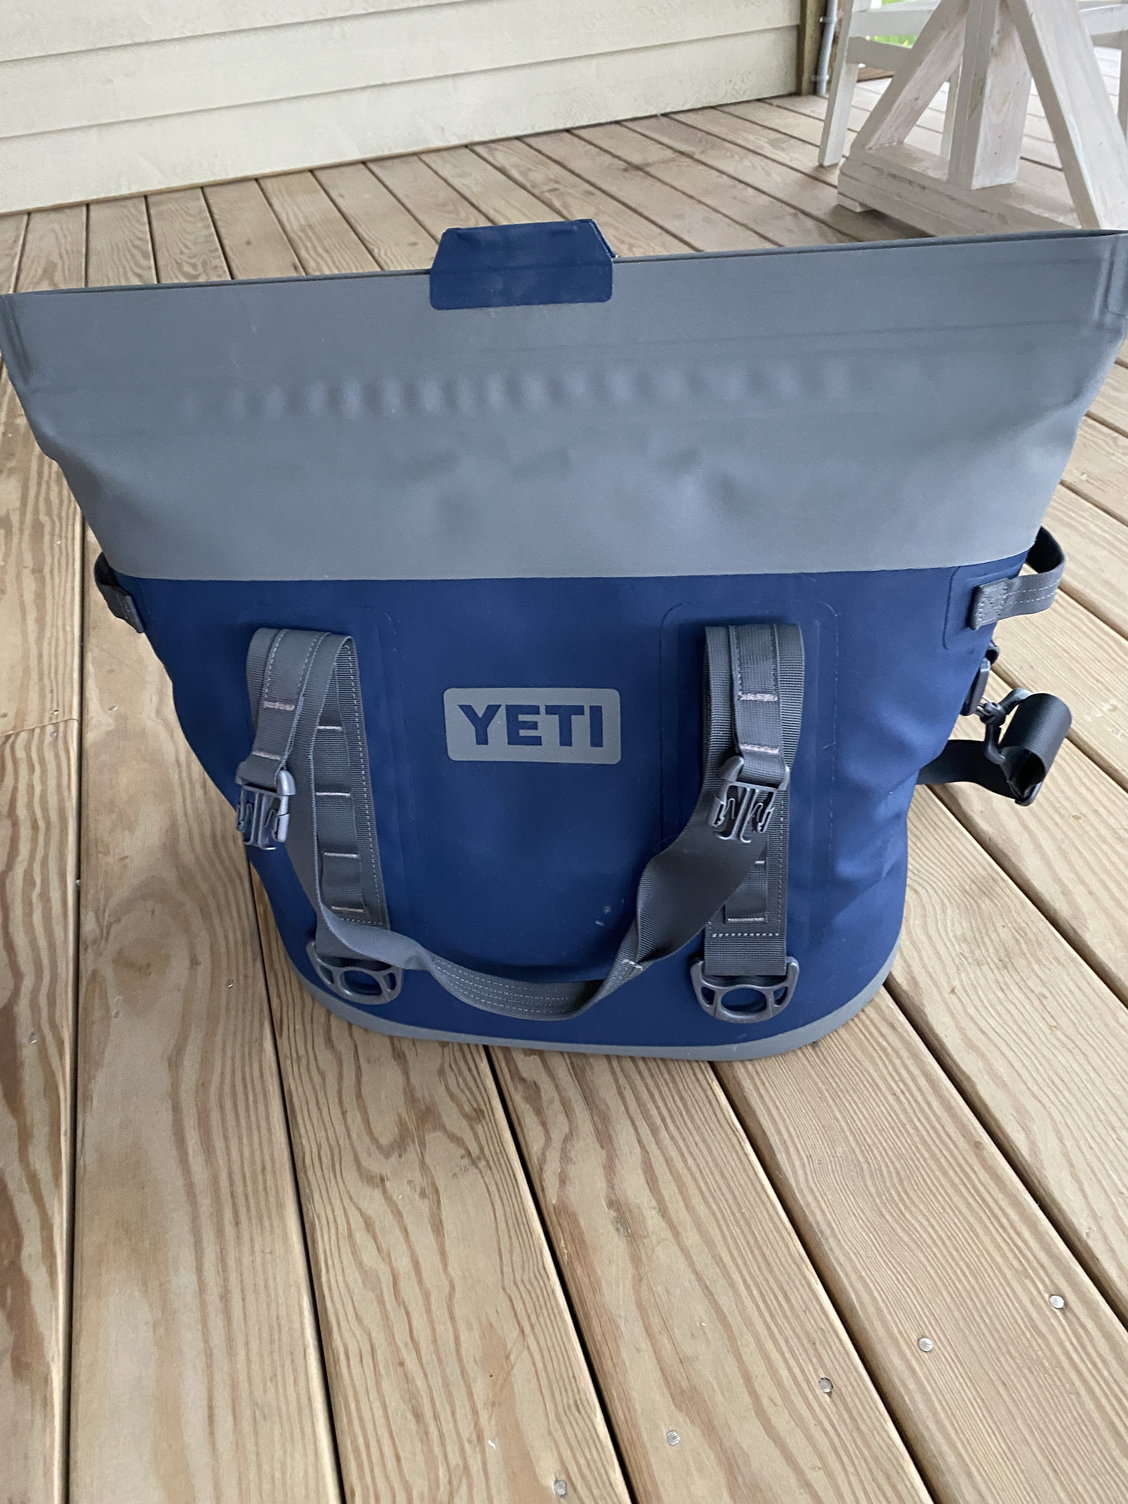 Yeti hopper m30 and bucket - The Hull Truth - Boating and Fishing